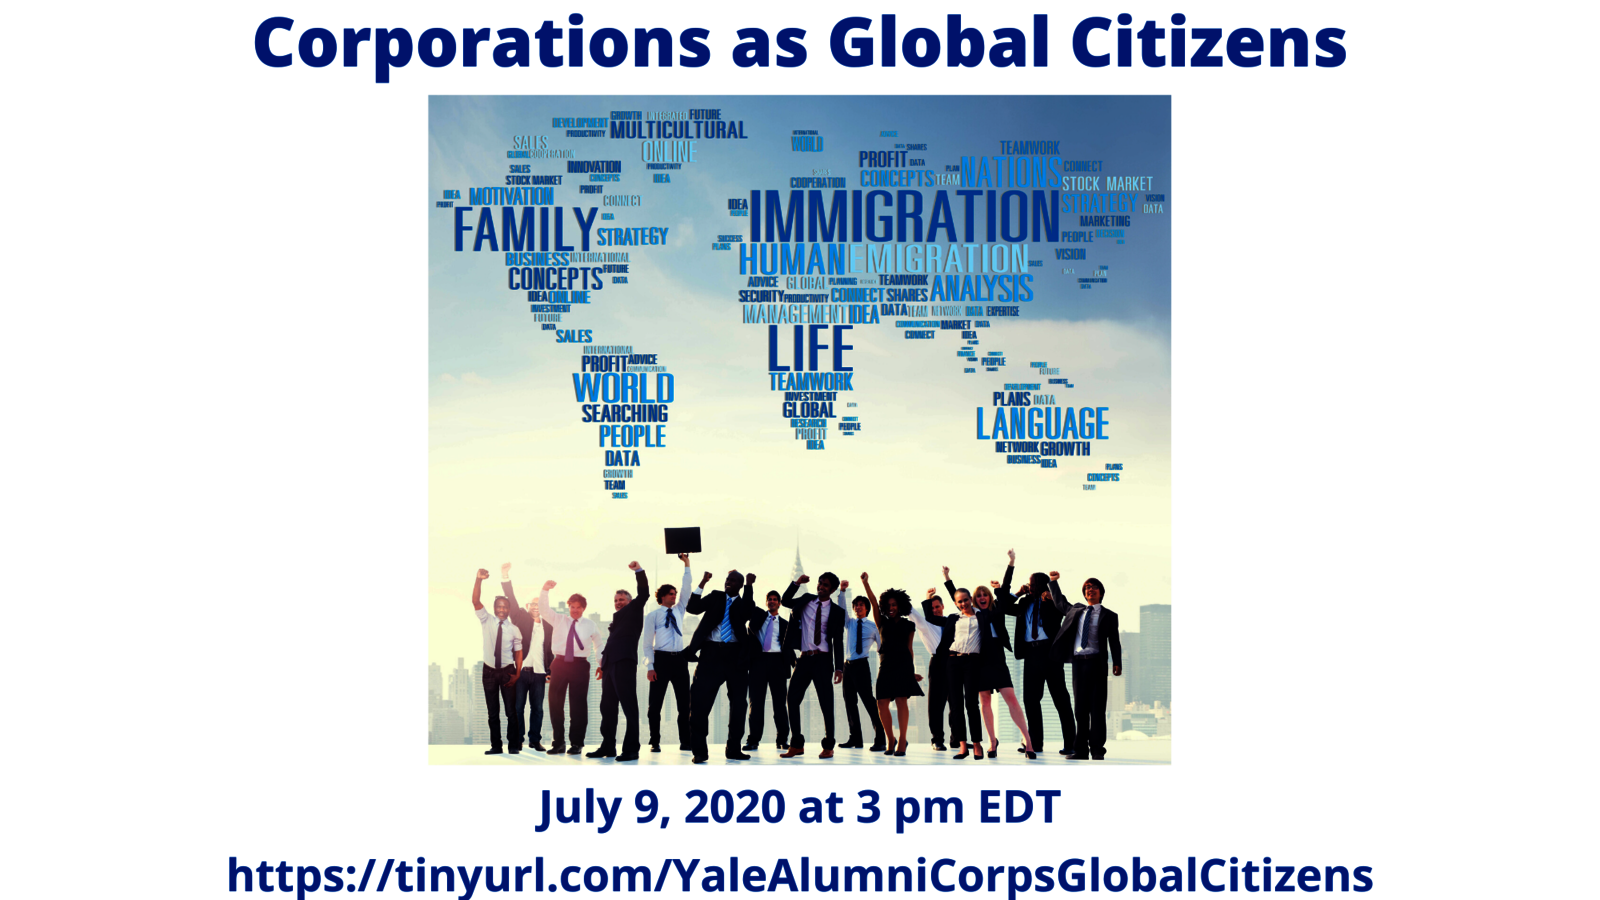 Graphic for webinar, "Corporations as Global Citizens"